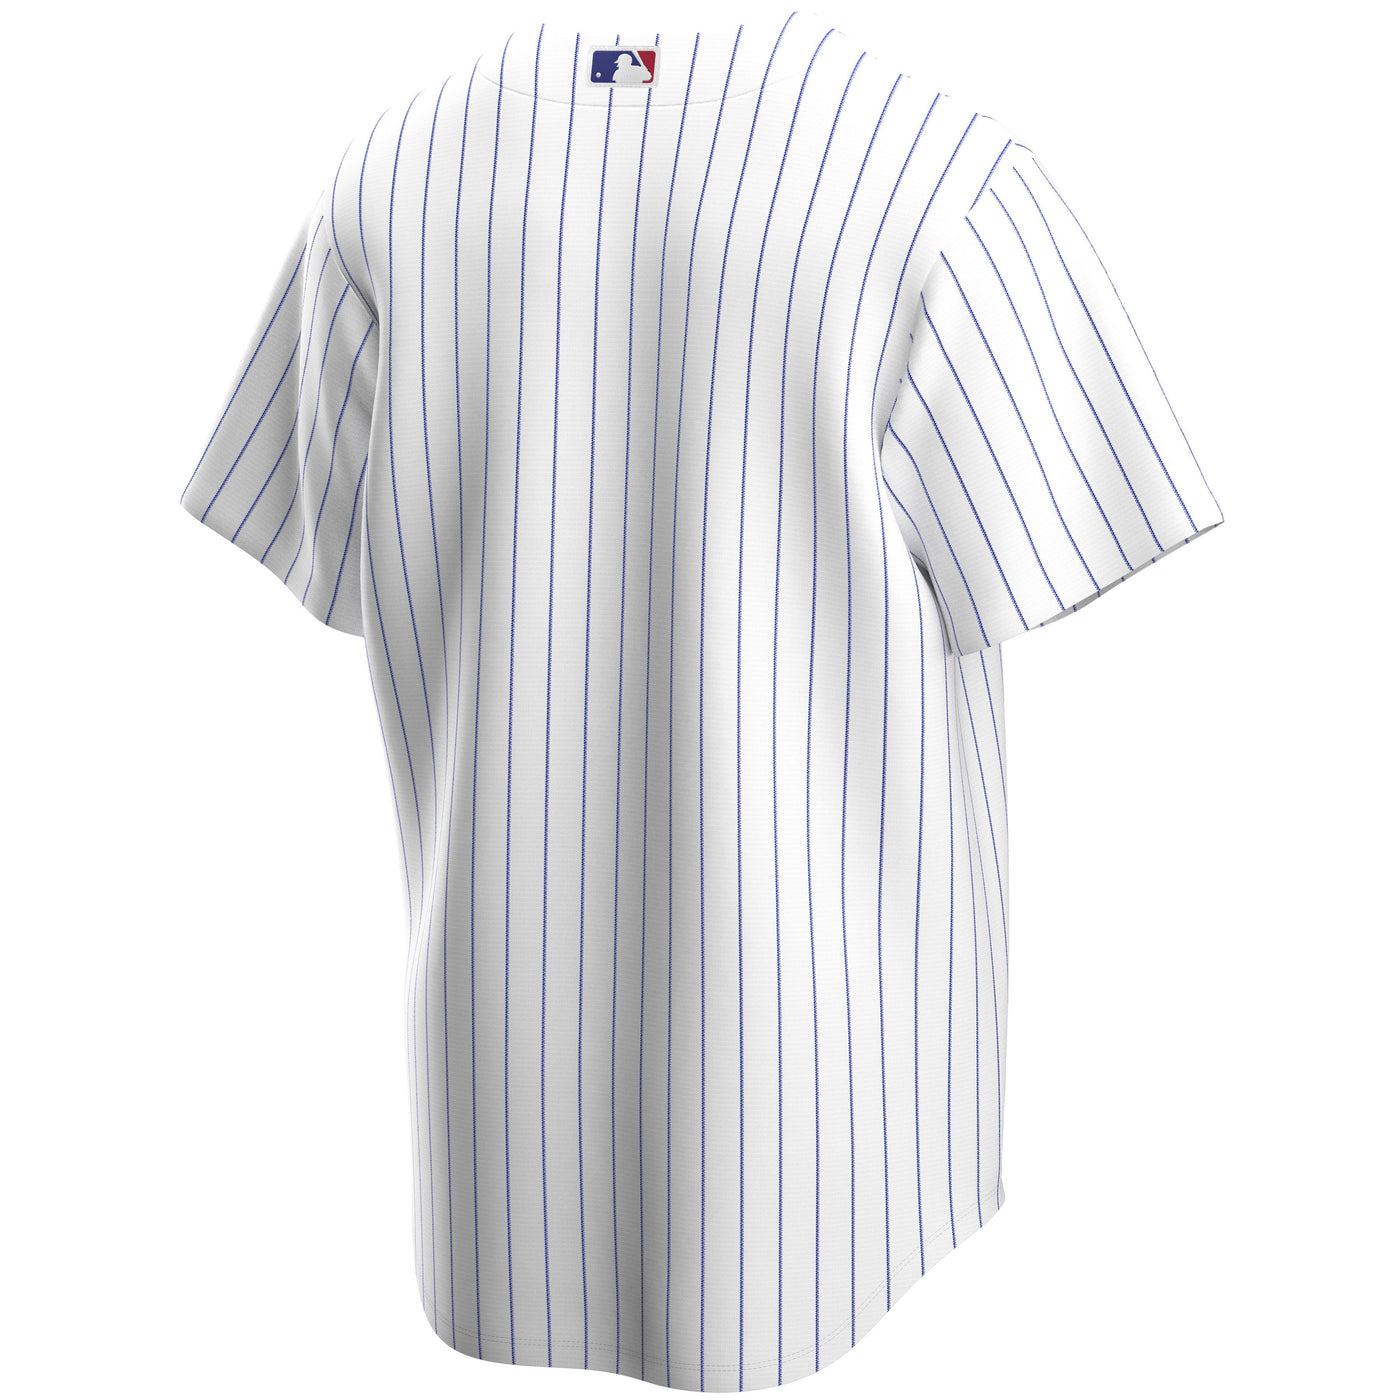 Chicago Cubs Jersey For Babies, Youth, Women, or Men